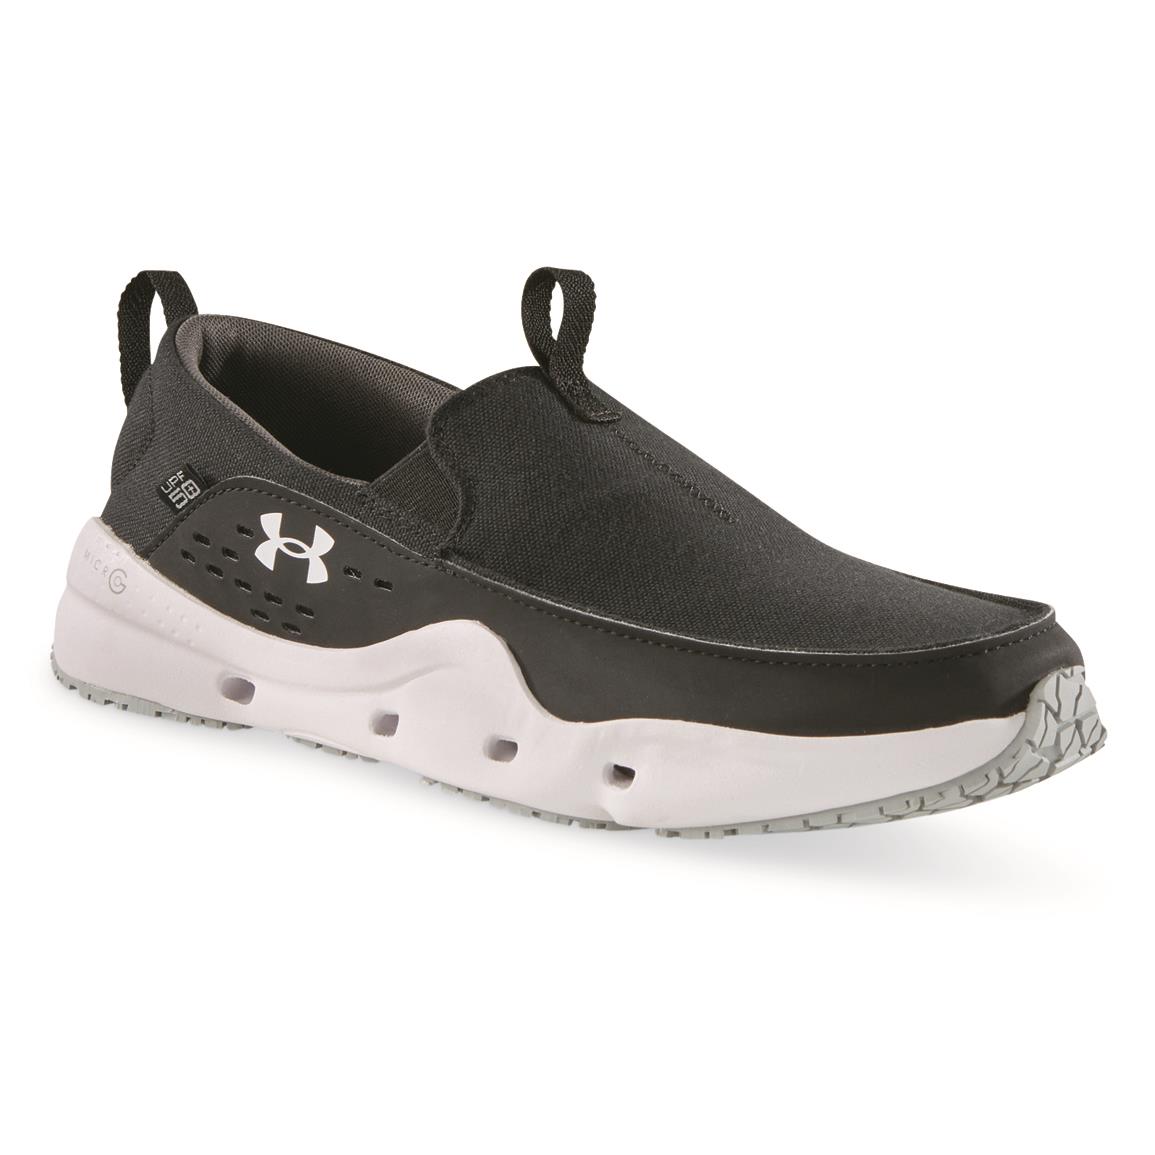 NEW Men's Under Armour Micro G Kilchis 3023739-200 Shoes Size 8.5